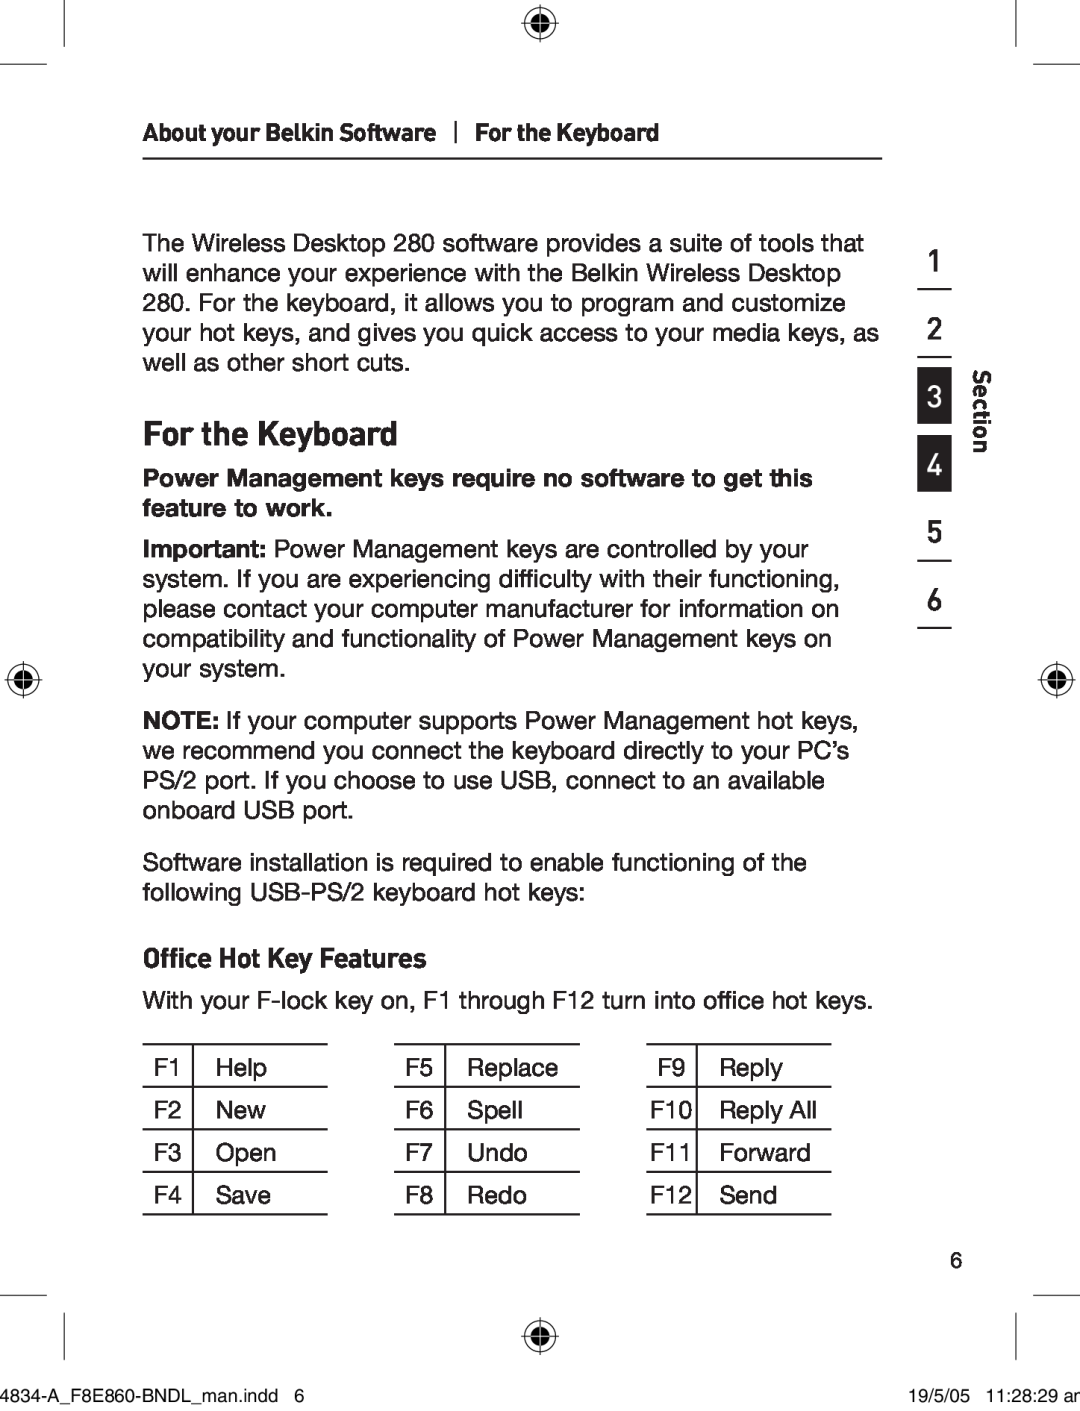 Belkin F8E860-BNDL manual Office Hot Key Features, About your Belkin Software For the Keyboard, Section 